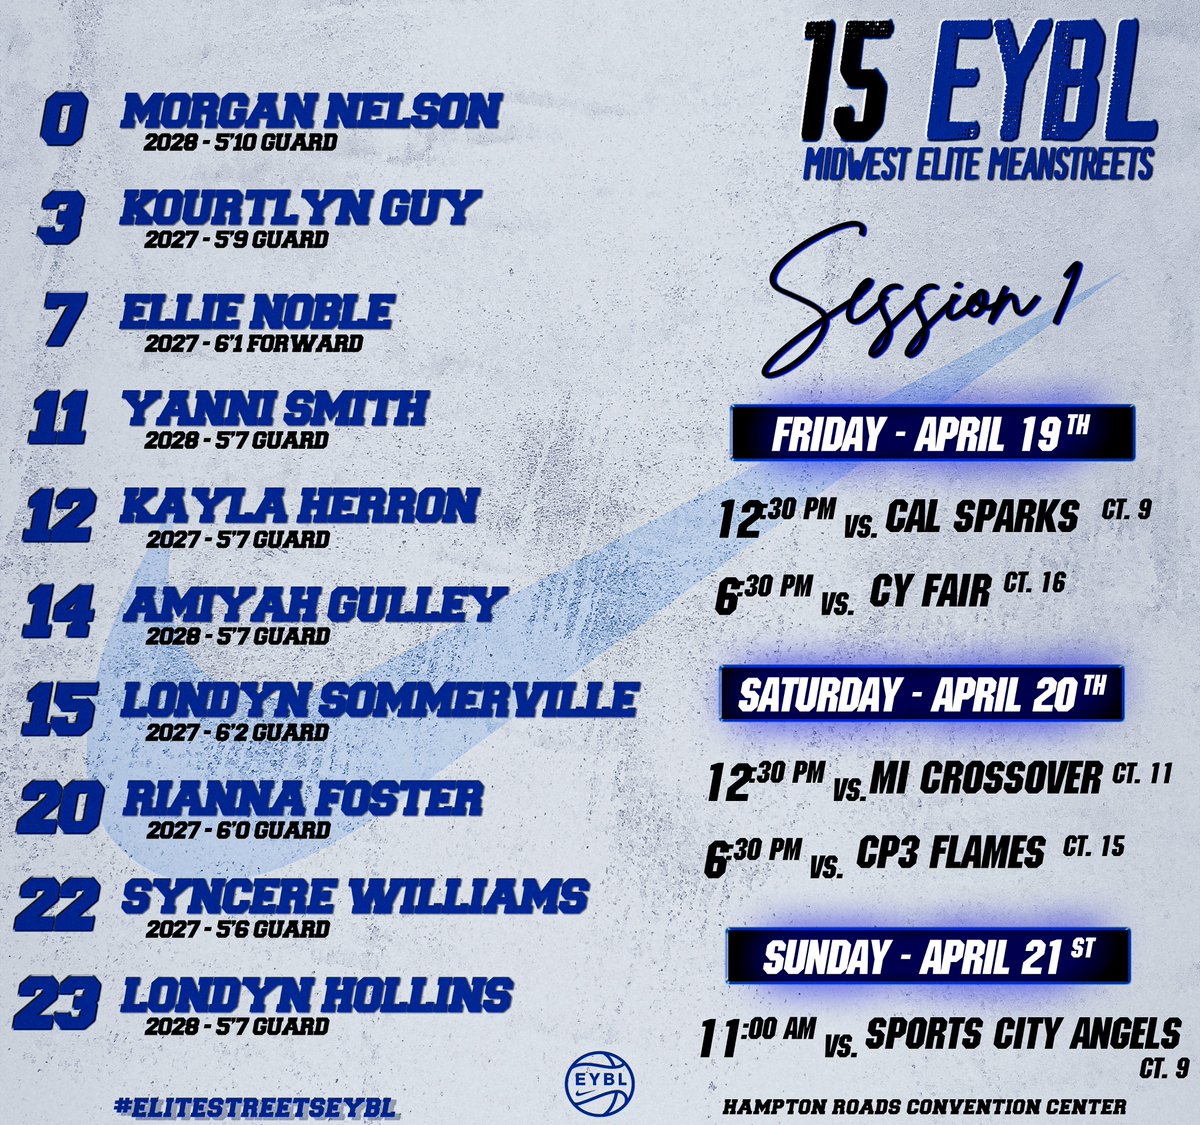 🚨Schedule Alert - 15 EYBL🚨 🔥 Heat check! The 15 EYBL team is ready to set the courts ablaze 🔥 at the EYBL Girls Circuit's first session. These girls are more than just numbers on a roster – they're the heartbeat of the game, bringing passion and precision to every play. 🏀